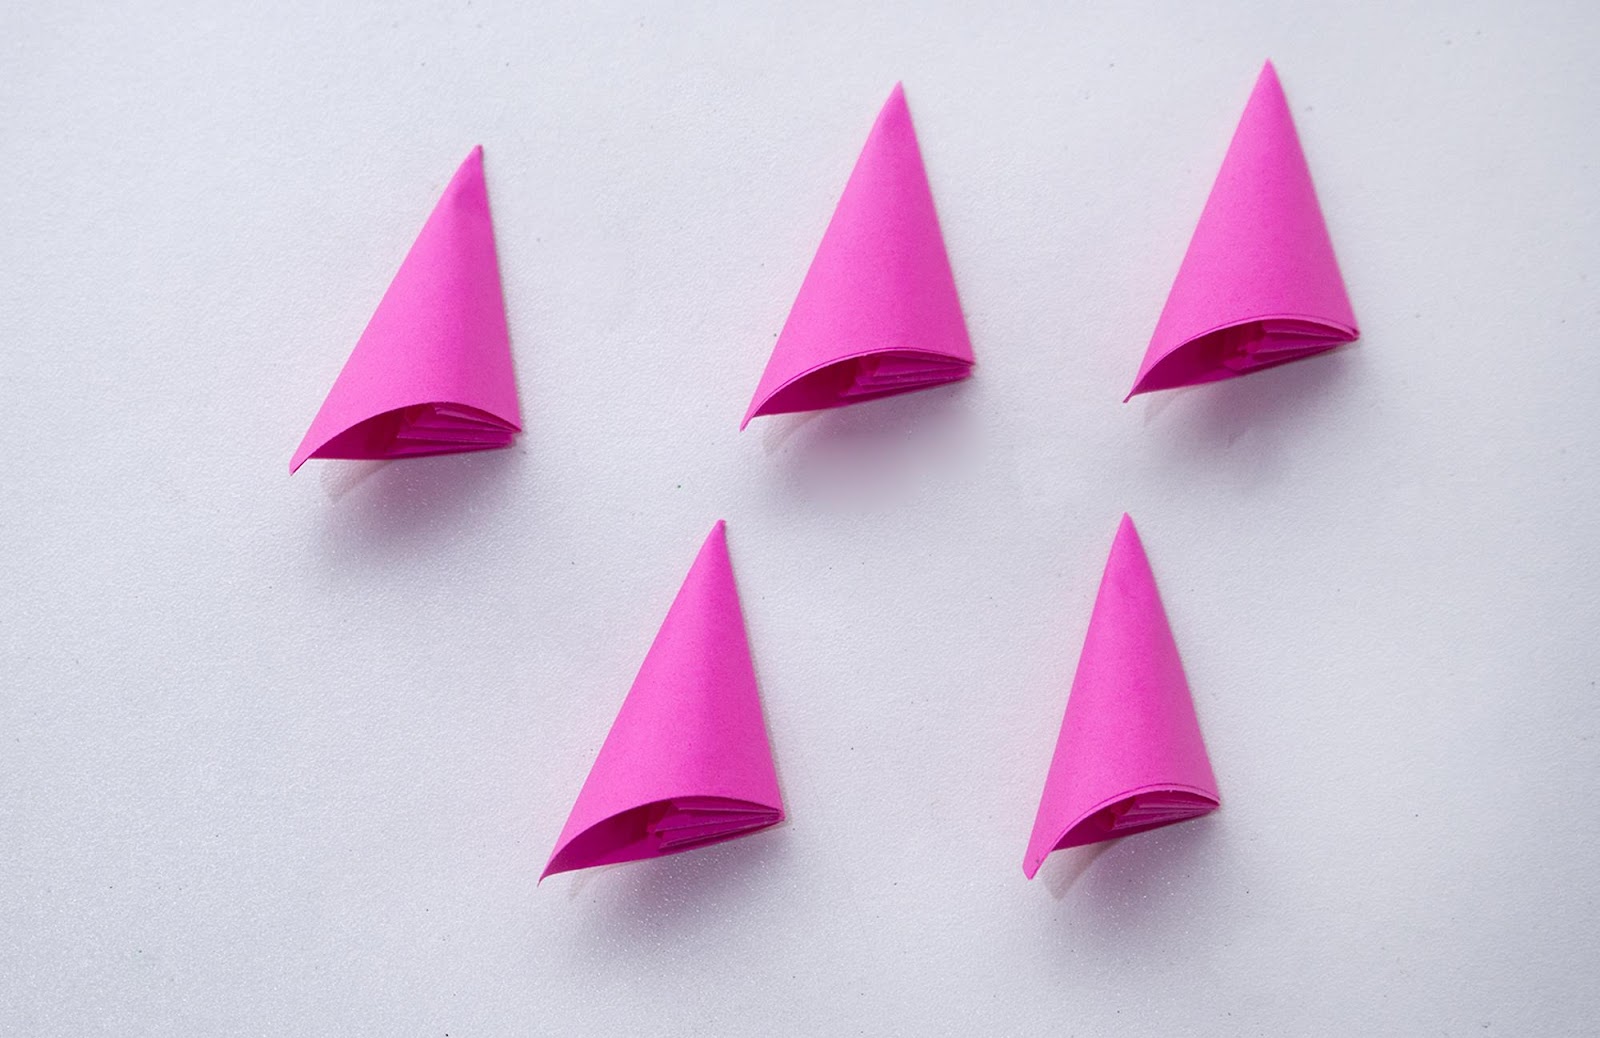 Five origami flower petals in conical shape made from pink paper